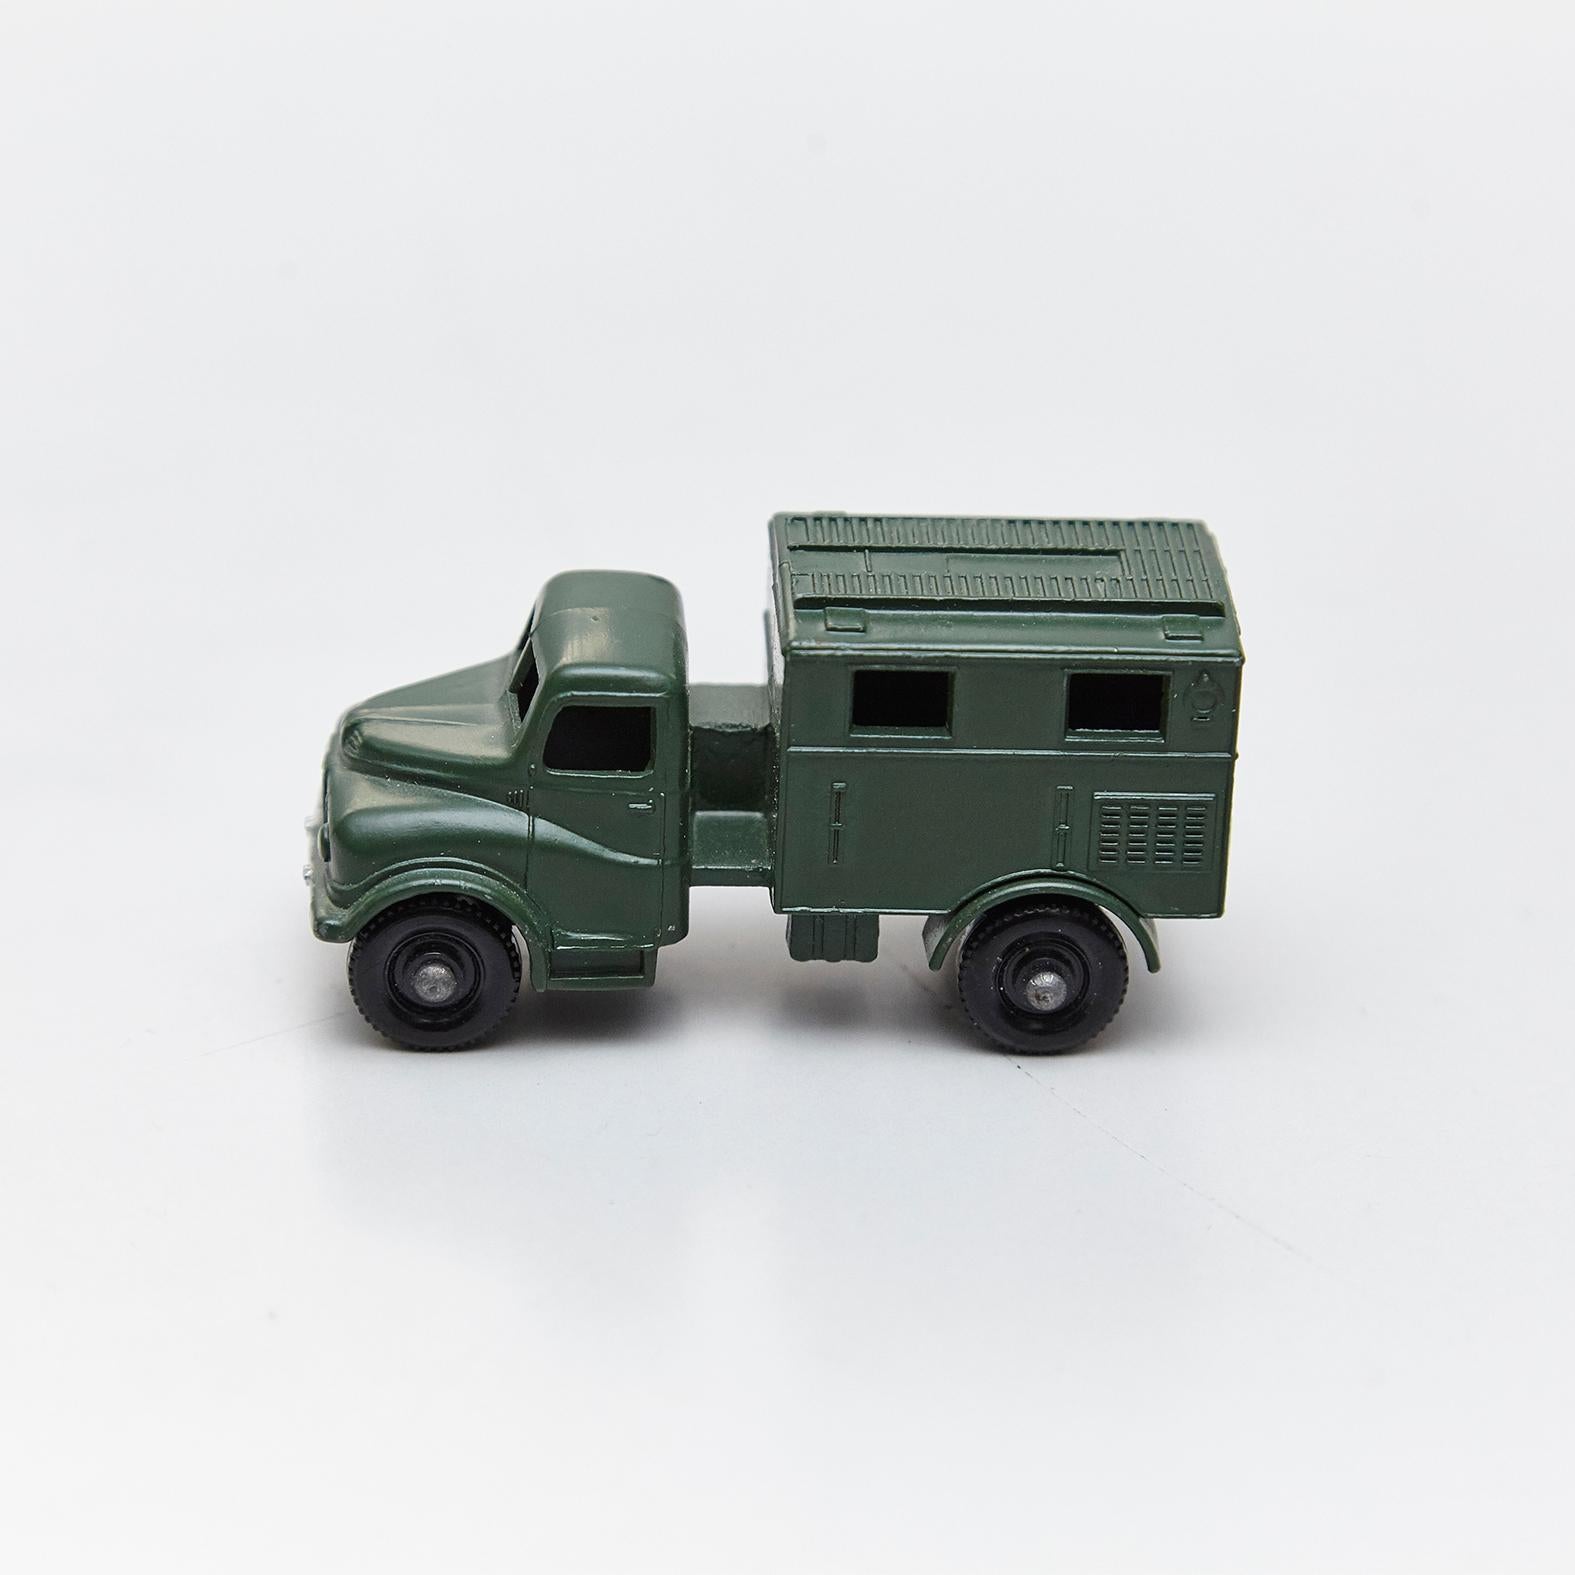 Lesney Matchboxes Series Antique Metal Toy Cars Green Military, Free Shipping 3